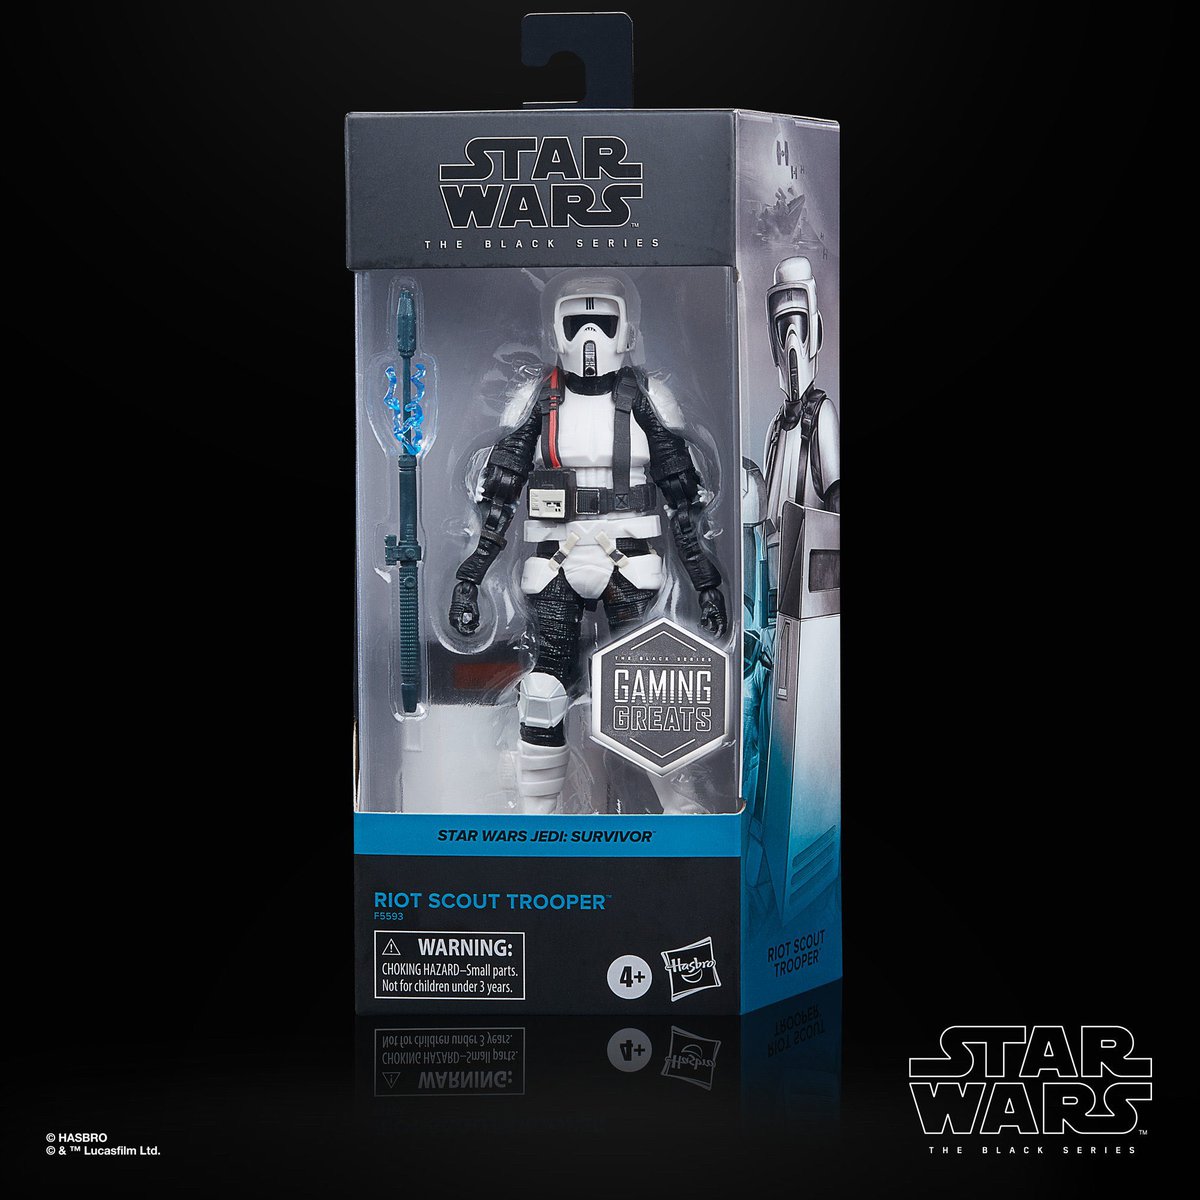 GameStop exclusive Star Wars, The Black Series - Gaming Greats, Riot Scout Trooper is available for preorder!

👉 bit.ly/3PV3Fxf

#ad #ActionFigure #ActionFigures #StarWars #TheBlackSeries #RiotScoutTrooper